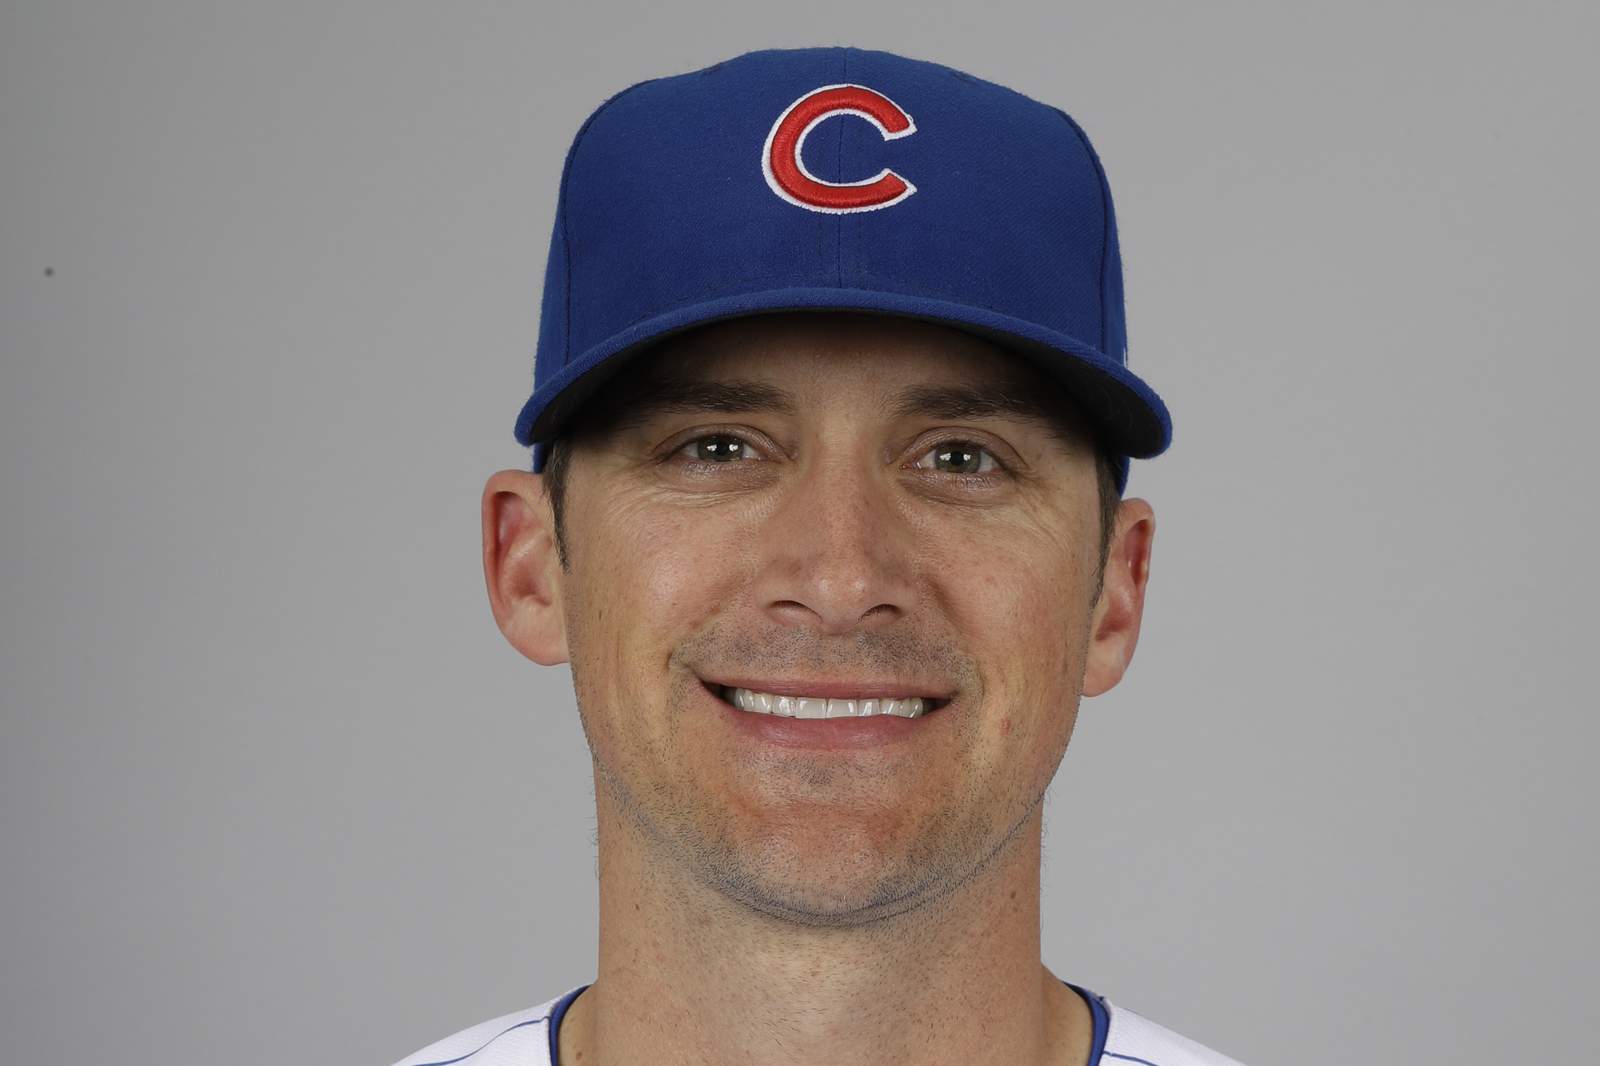 Cubs pitching coach says COVID-19 quarantined him for month